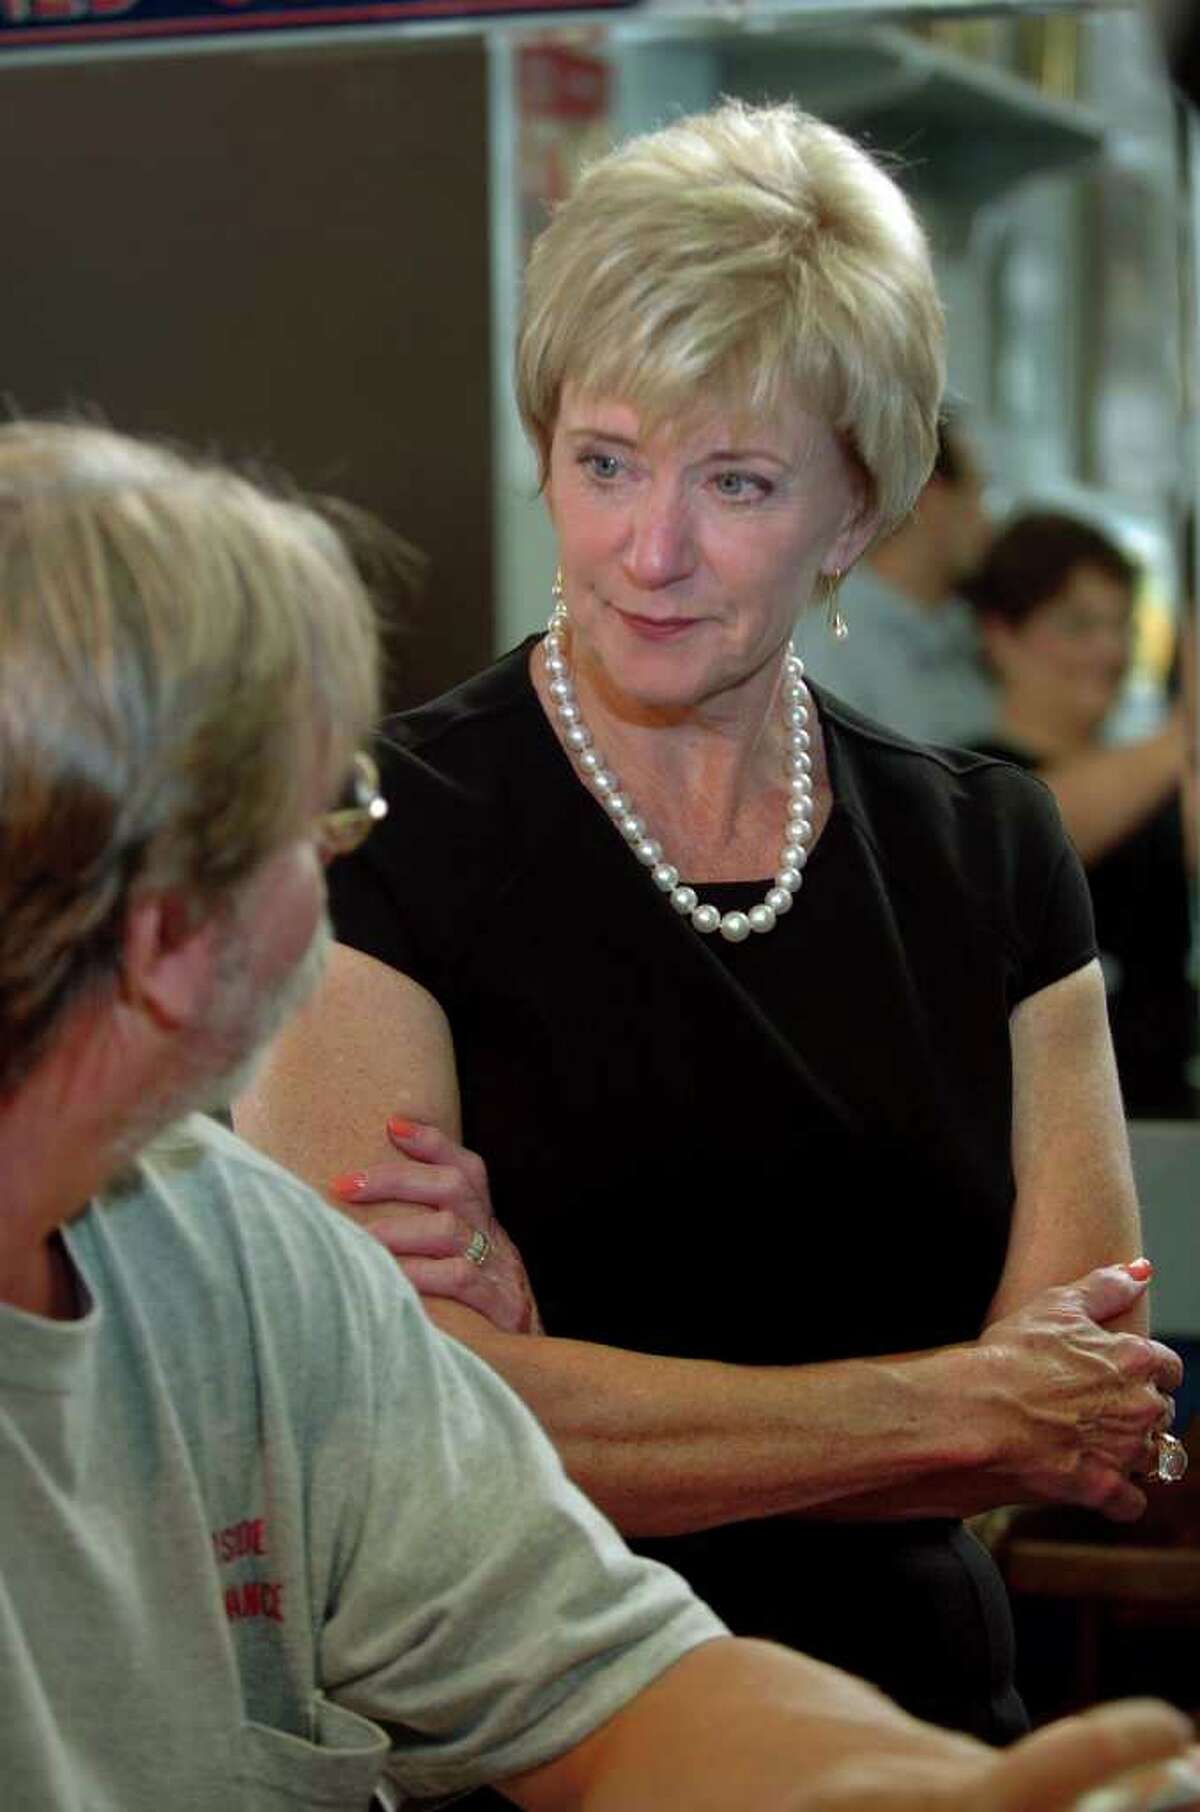 Republican senatorial candidate Linda McMahon spent some time touring small businesses in North Haven, Conn. on Wednesday August 11, 2010. Here, McMahon listens to the concerns of customer Michael Martindale, of Hamden, as he has breakfast at Scotty the Omelet King restaurant along Broadway in the town.